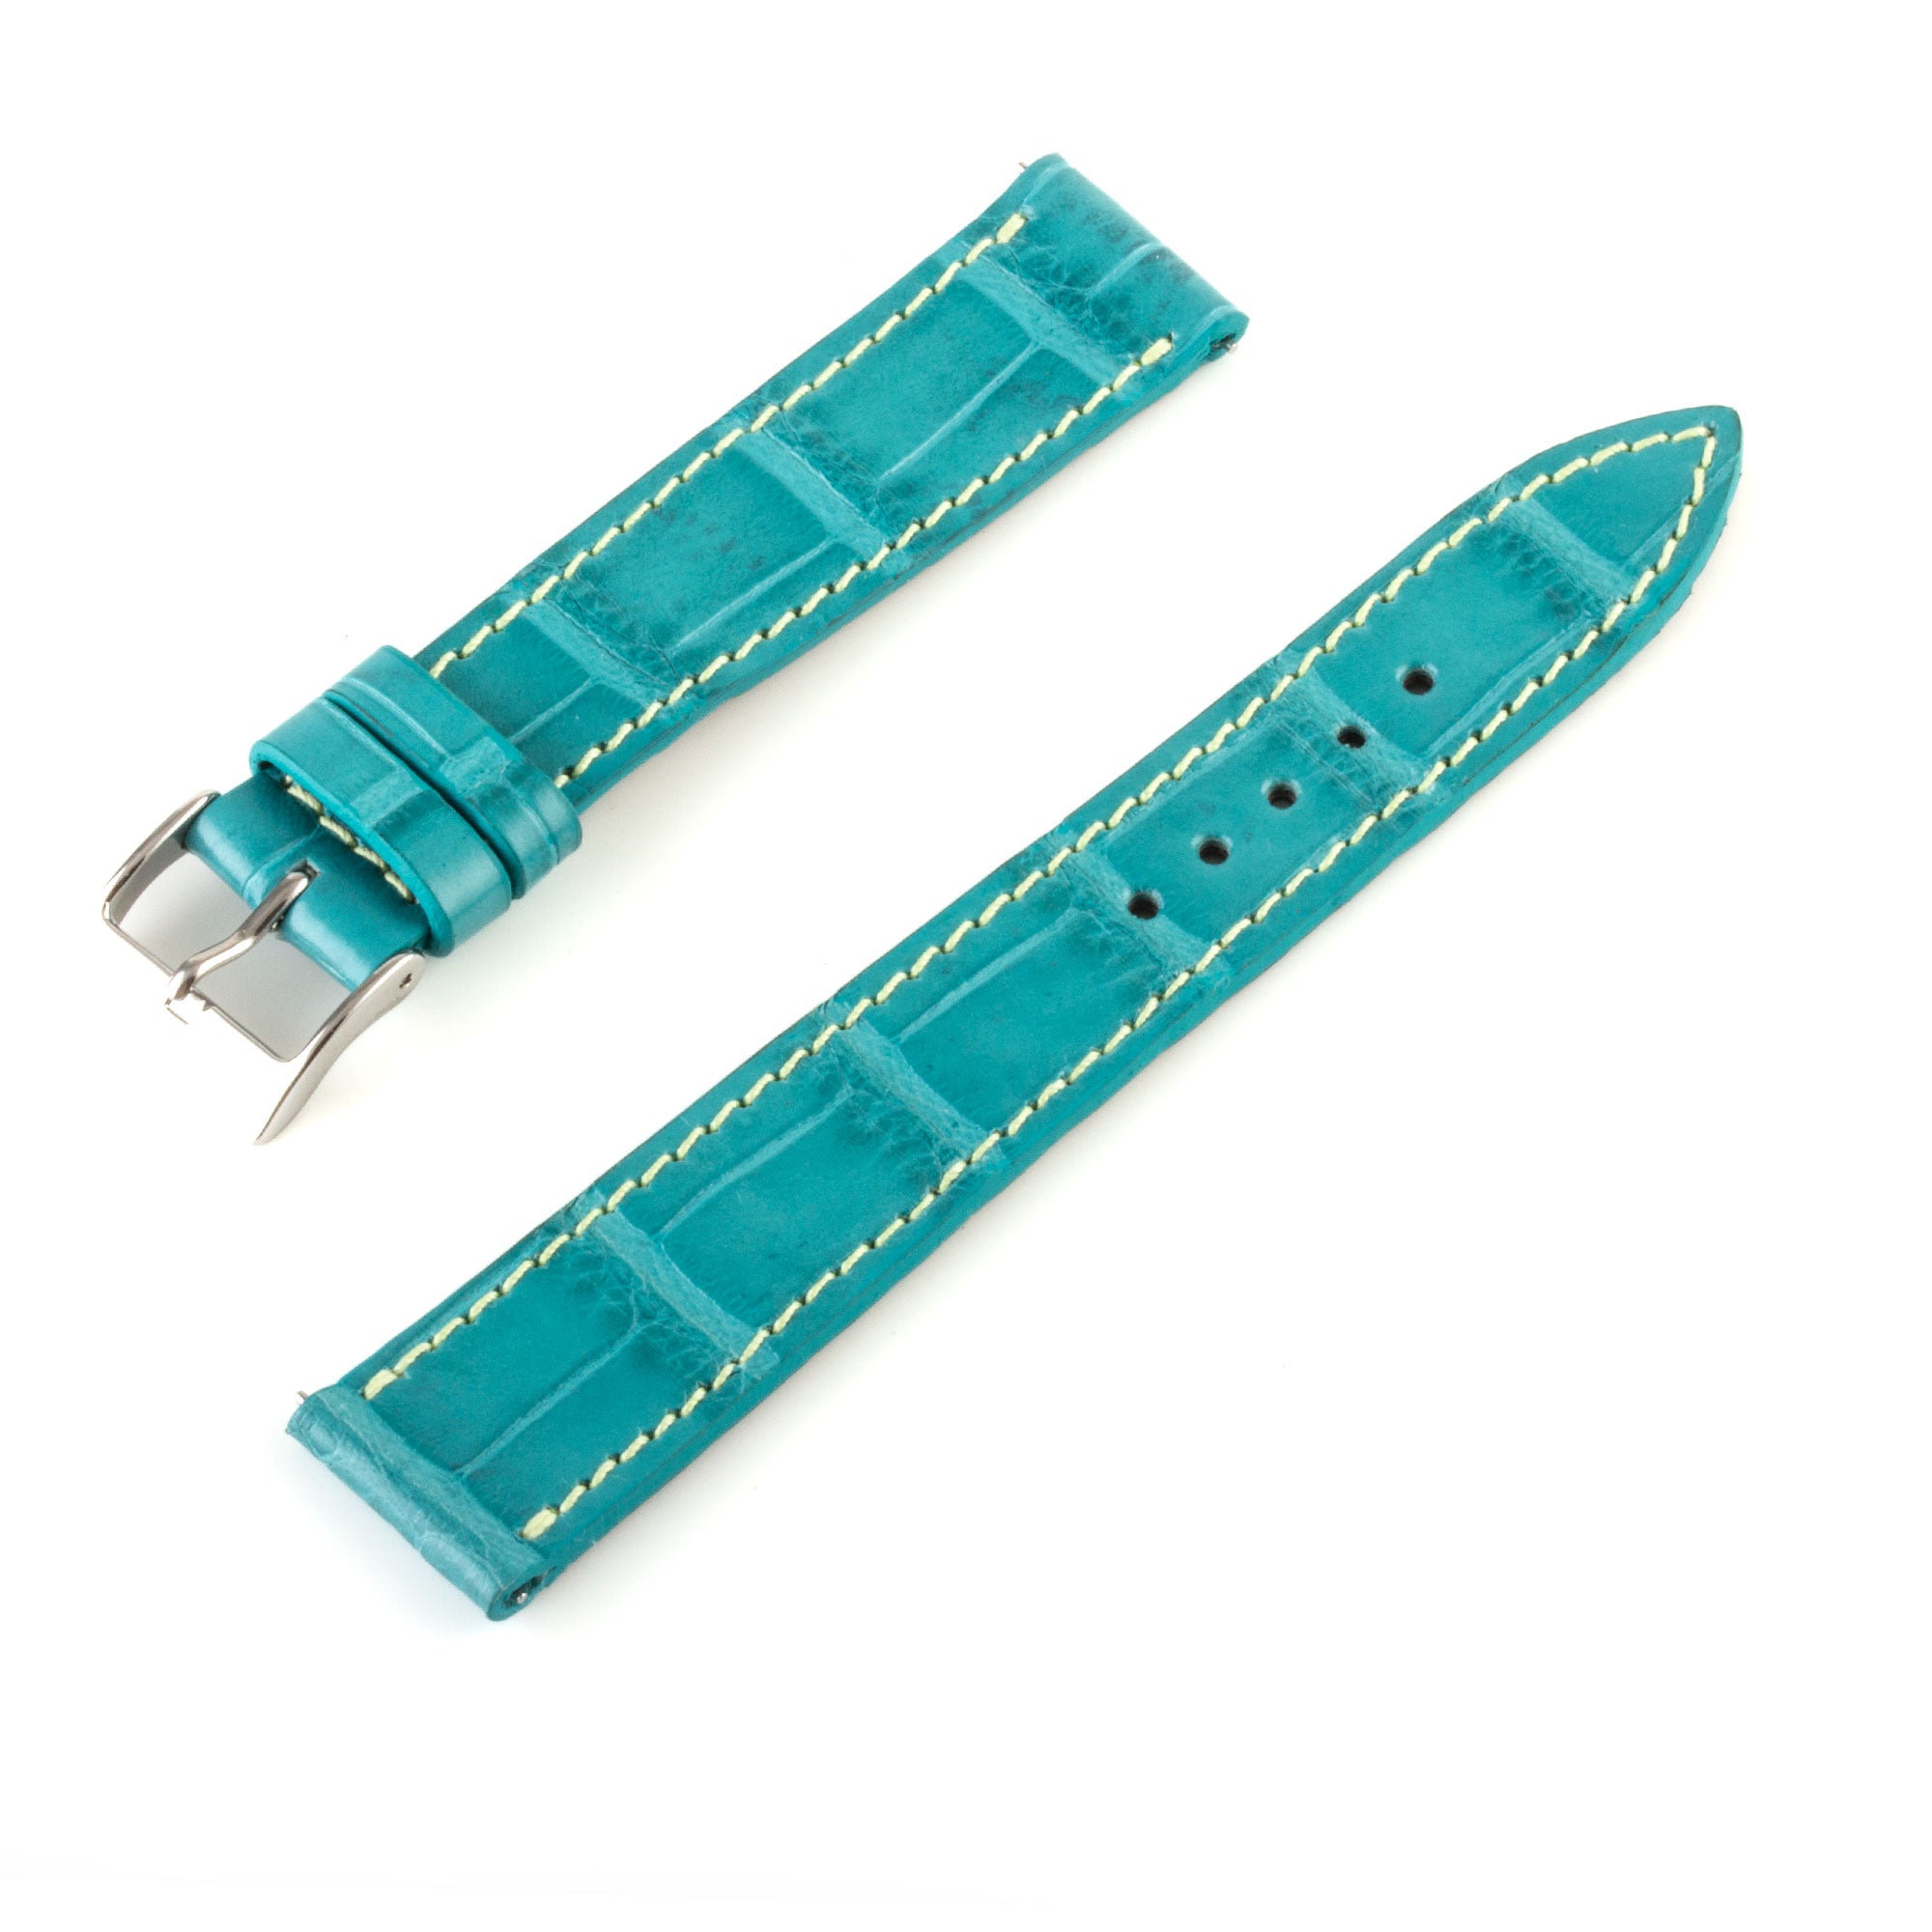 Alligator leather "Solo" watch band - 18mm width (0.71 inches) / Size M (n° 9)